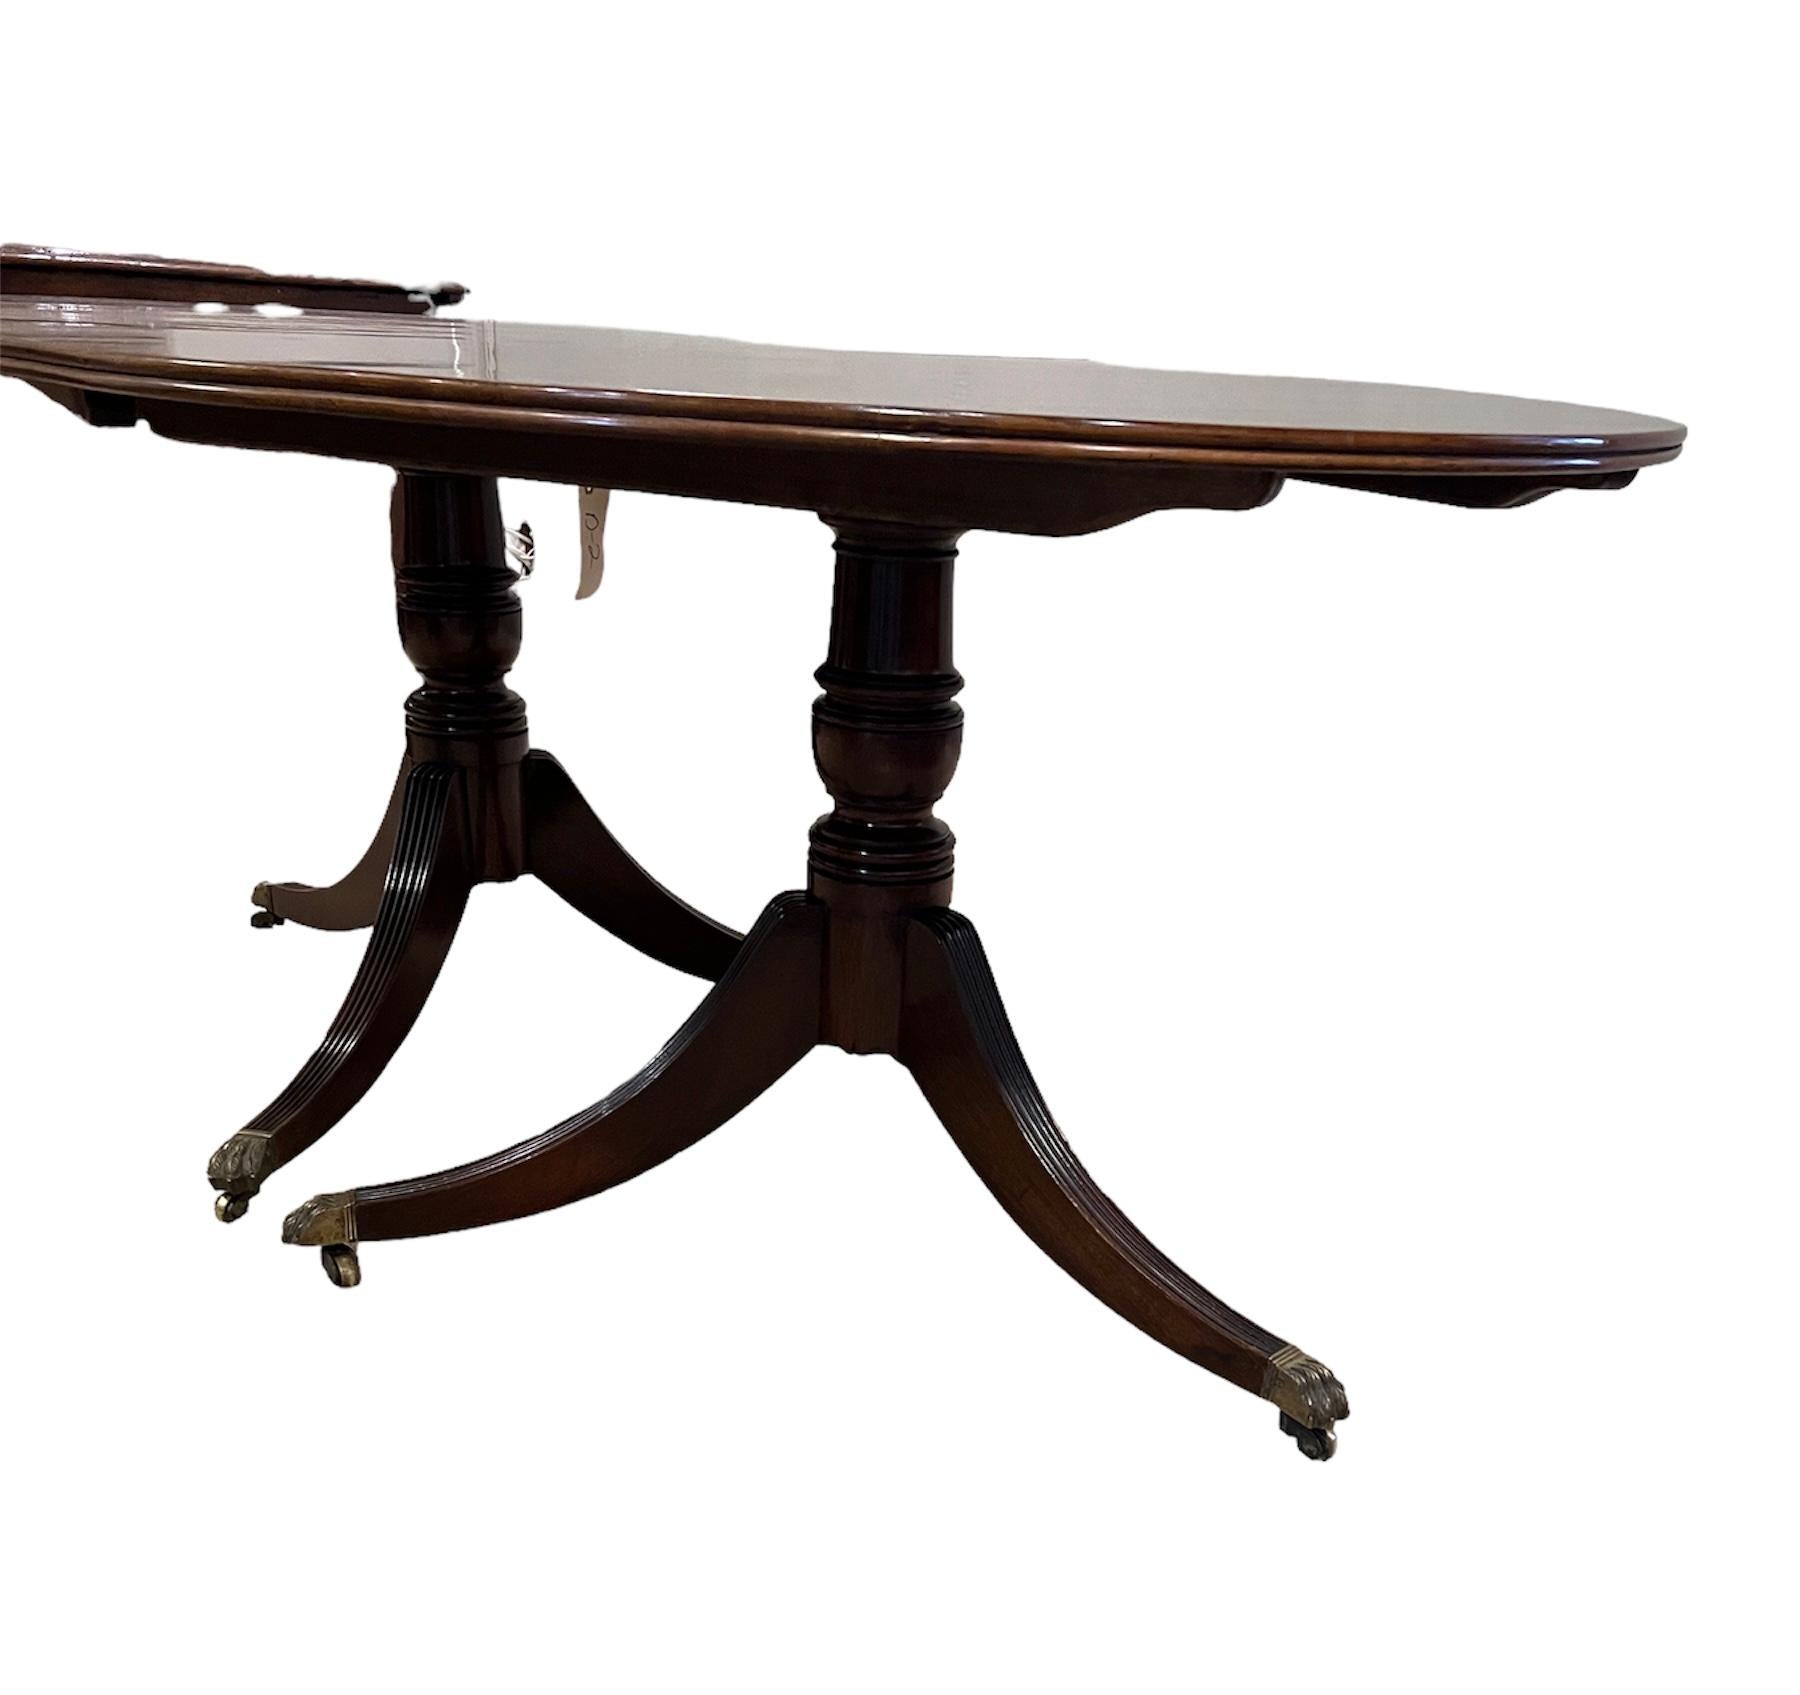 Polished George III Style Mahogany Dining Table. 2 pedestals 2 leaves 